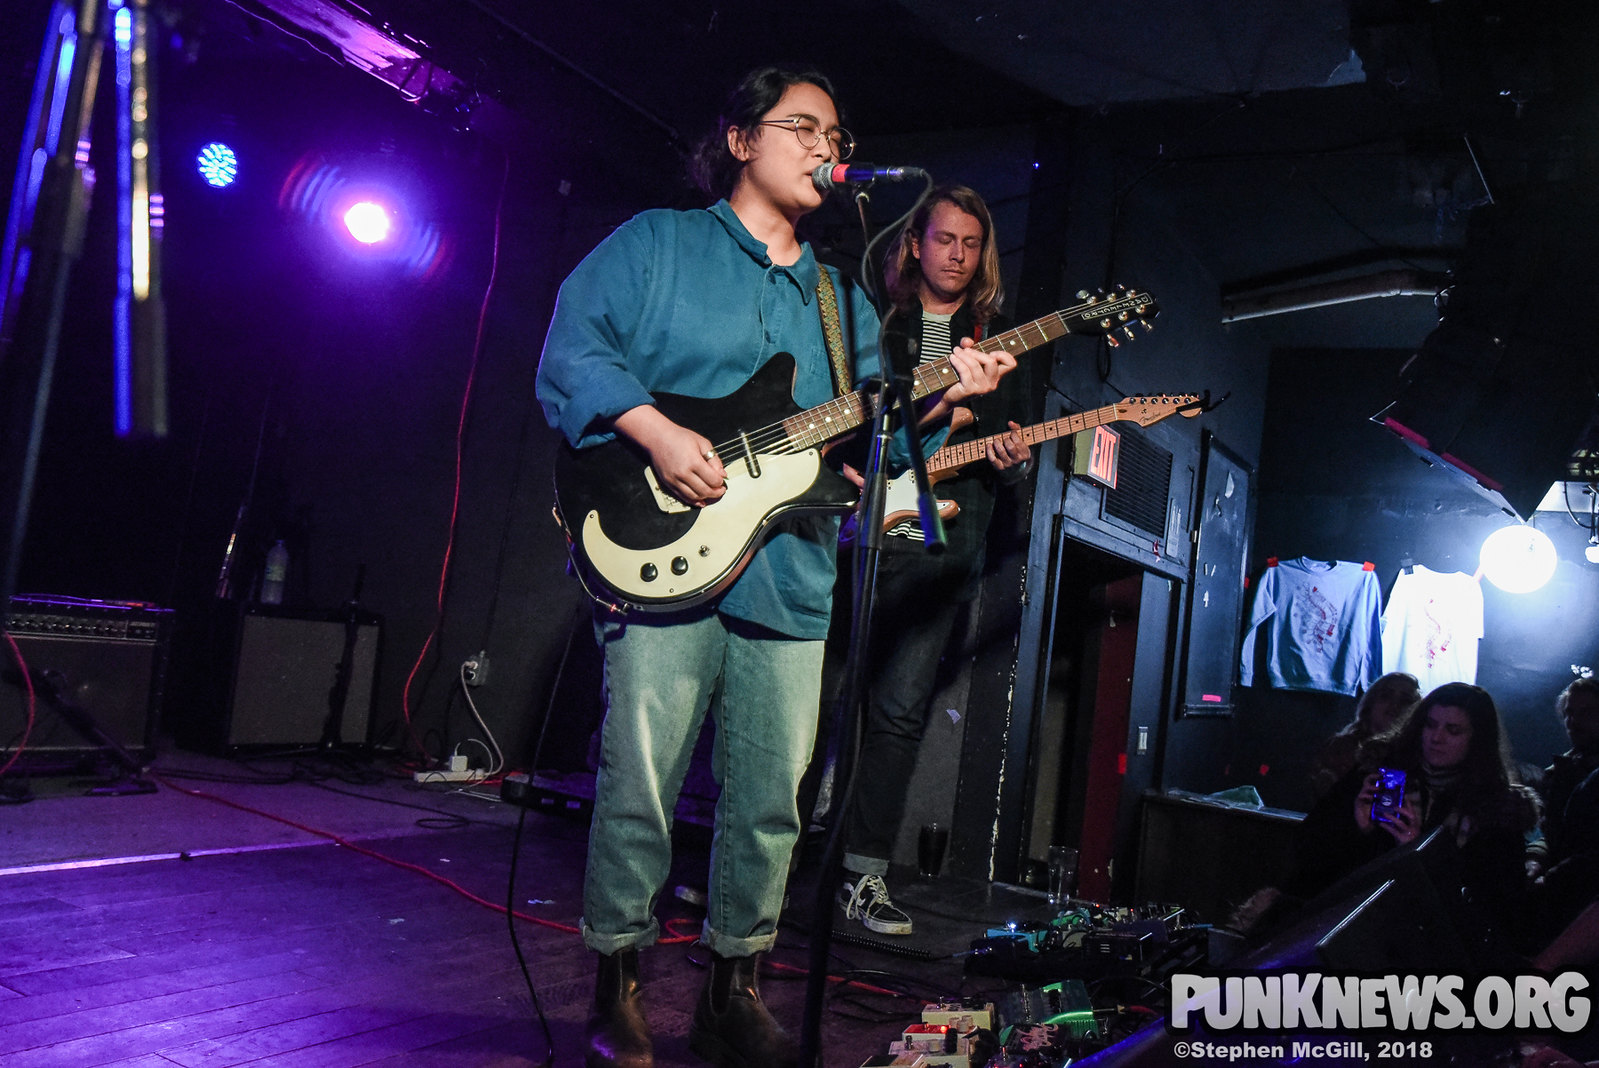 Justus Proffit and Jay Som at The Garrison, 12/11